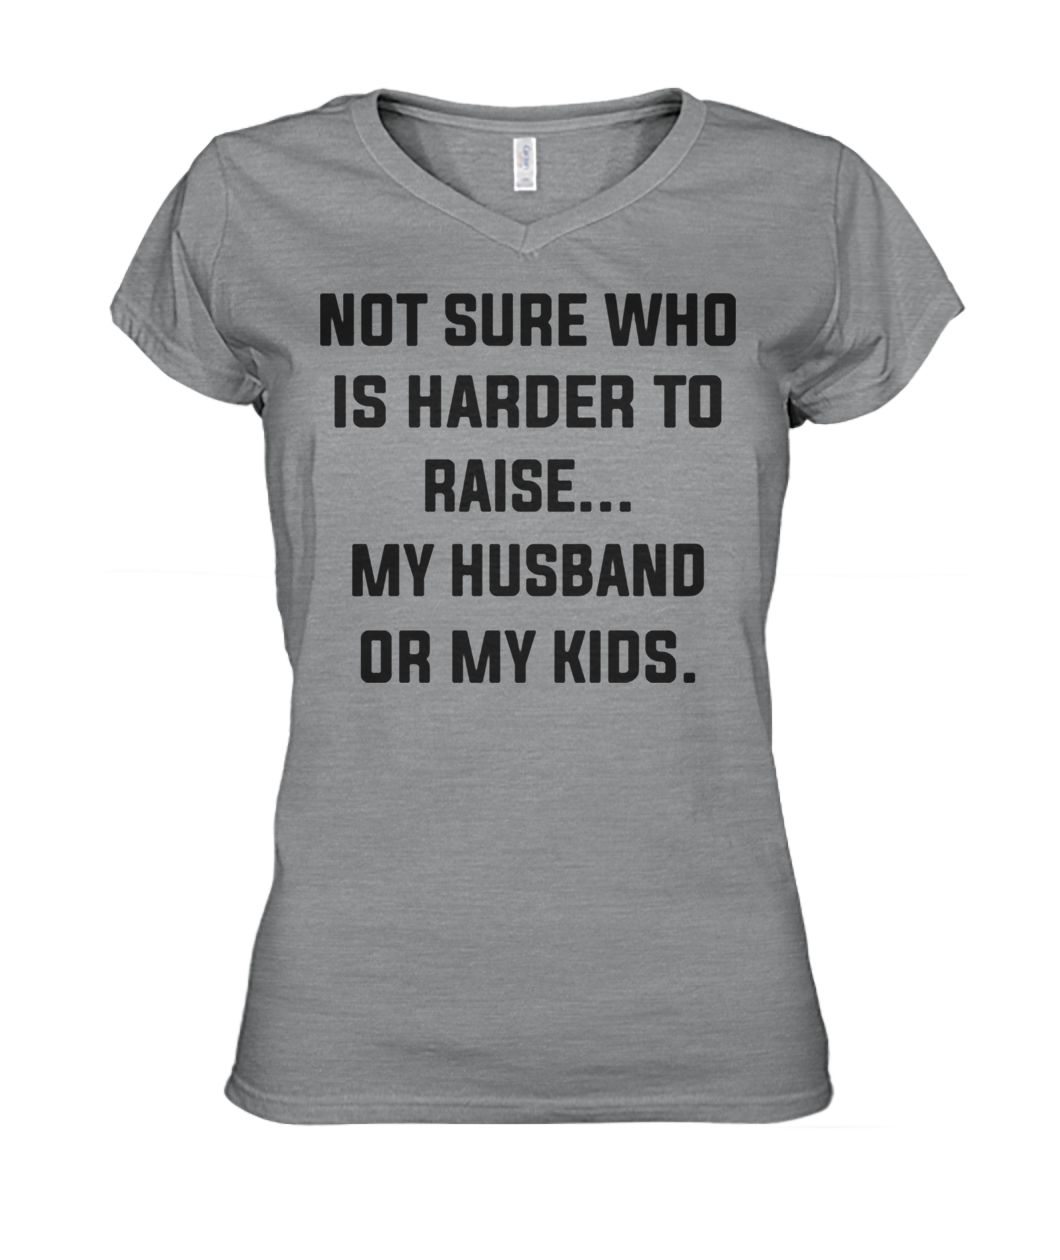 Not sure who is harder to raise my husband or my kids women's v-neck